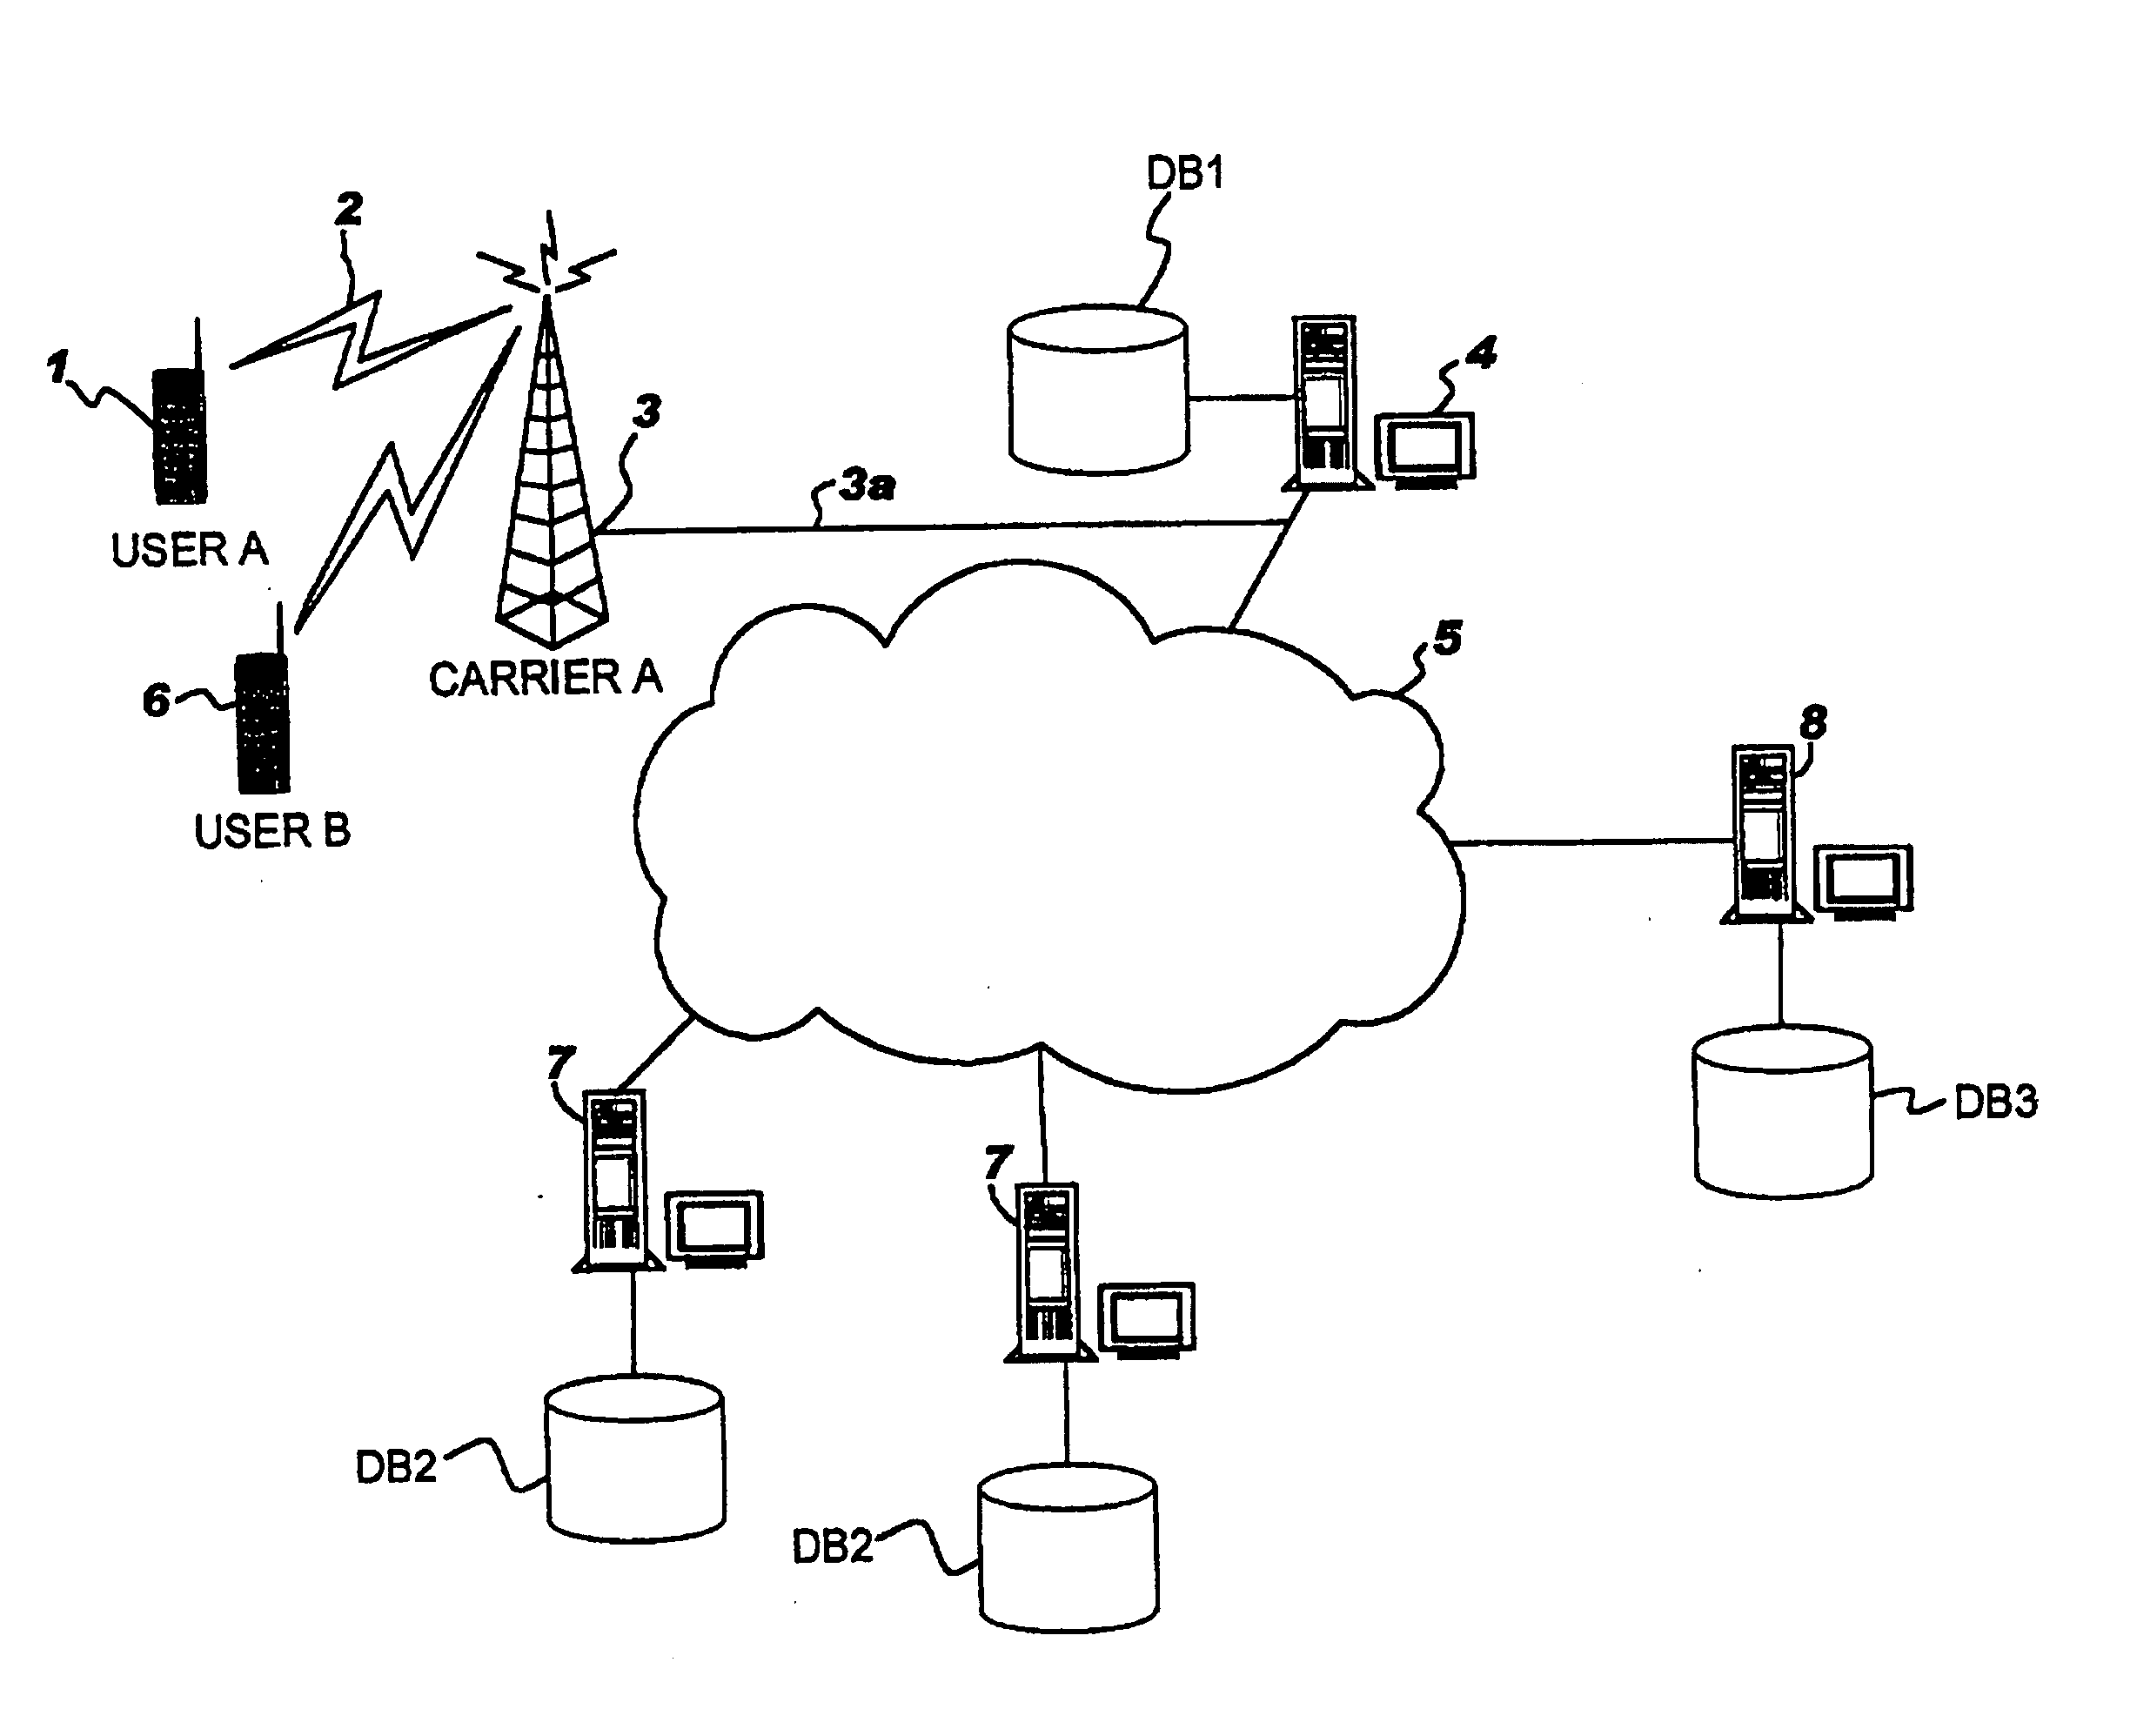 Method and system for presentation of content from one cellular phone to another through a computer network